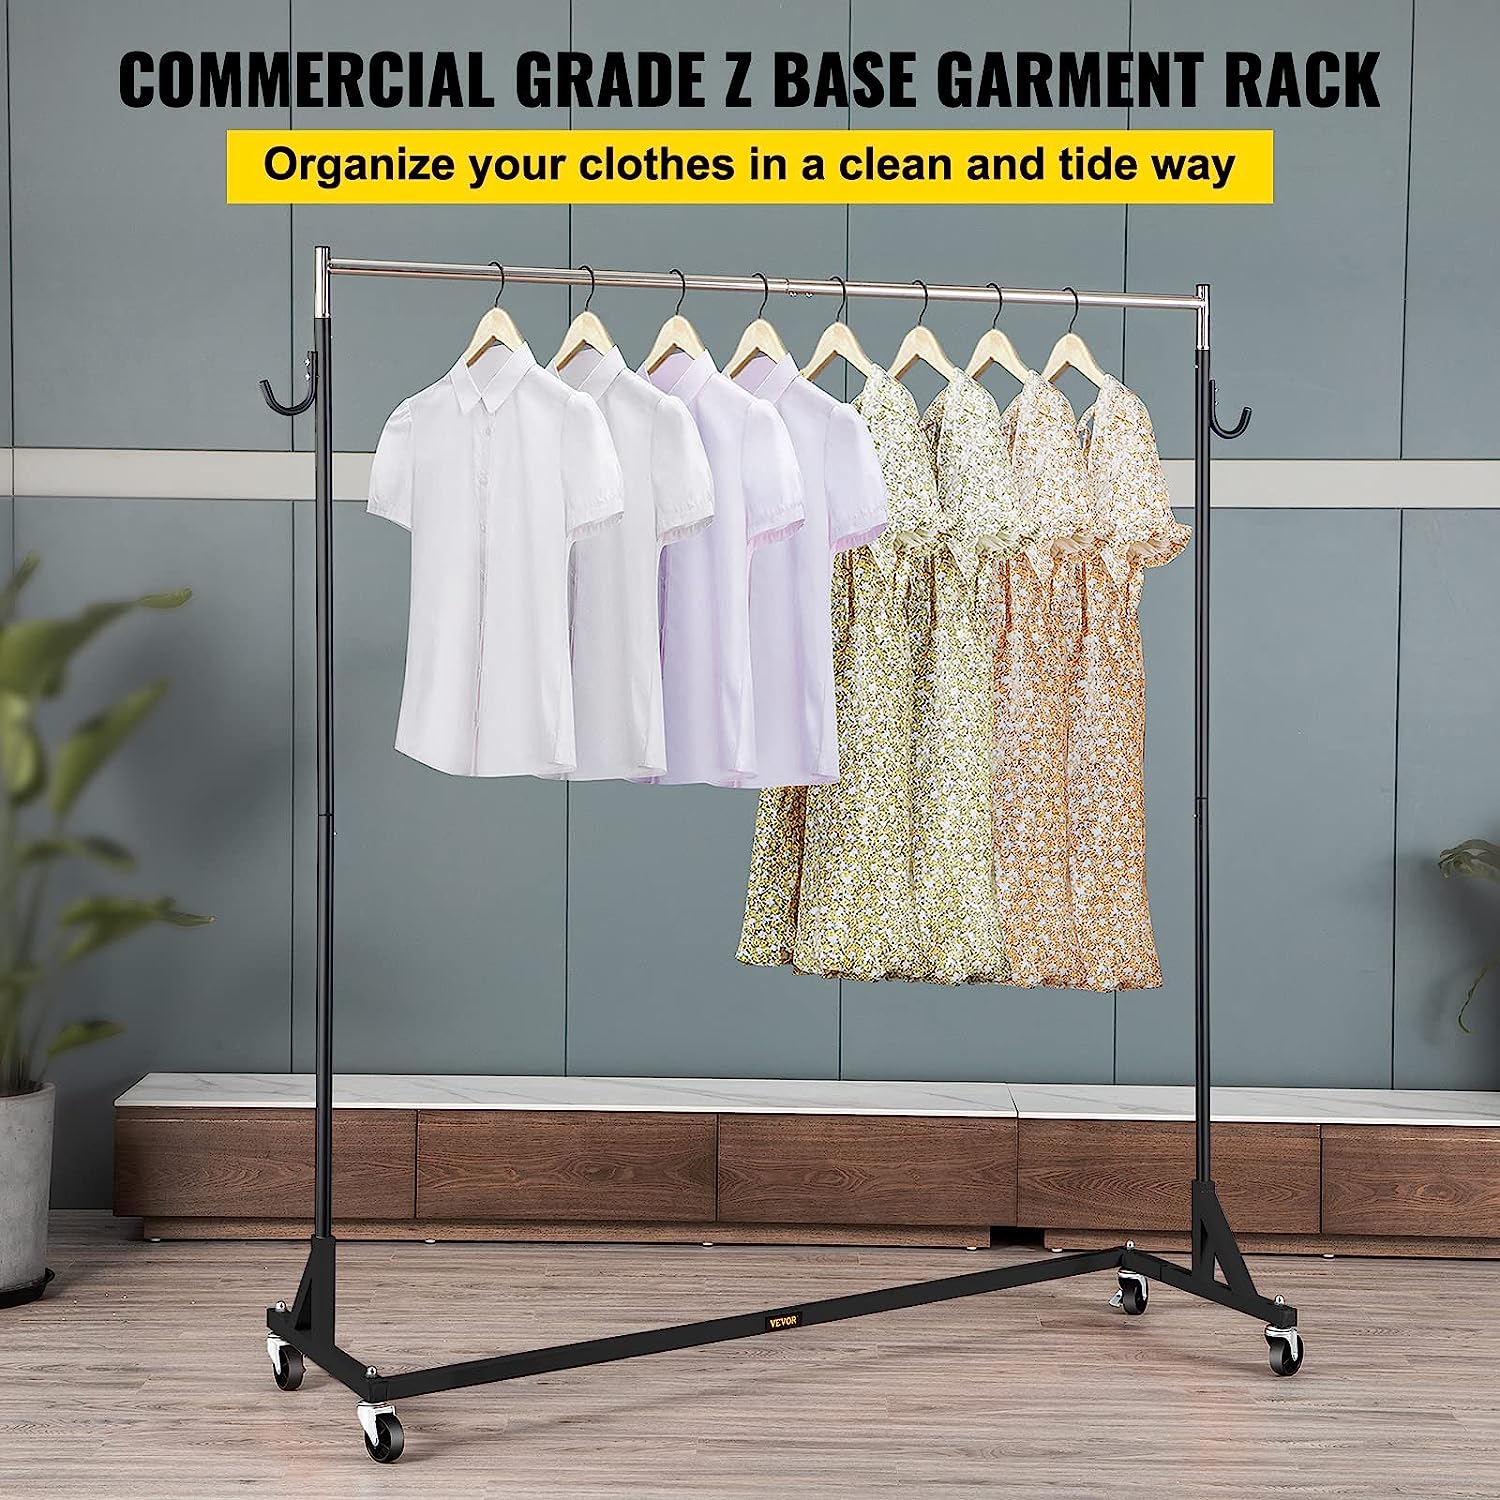 Z Rack, 300 lbs Industrial Grade Z Base Garment Rack, 24" x 63" x 63" Height Adjustable Clothes Rack, Sturdy Steel Heavy Duty Clothing Rack w/ Lockable Casters for Home Garment Store Black